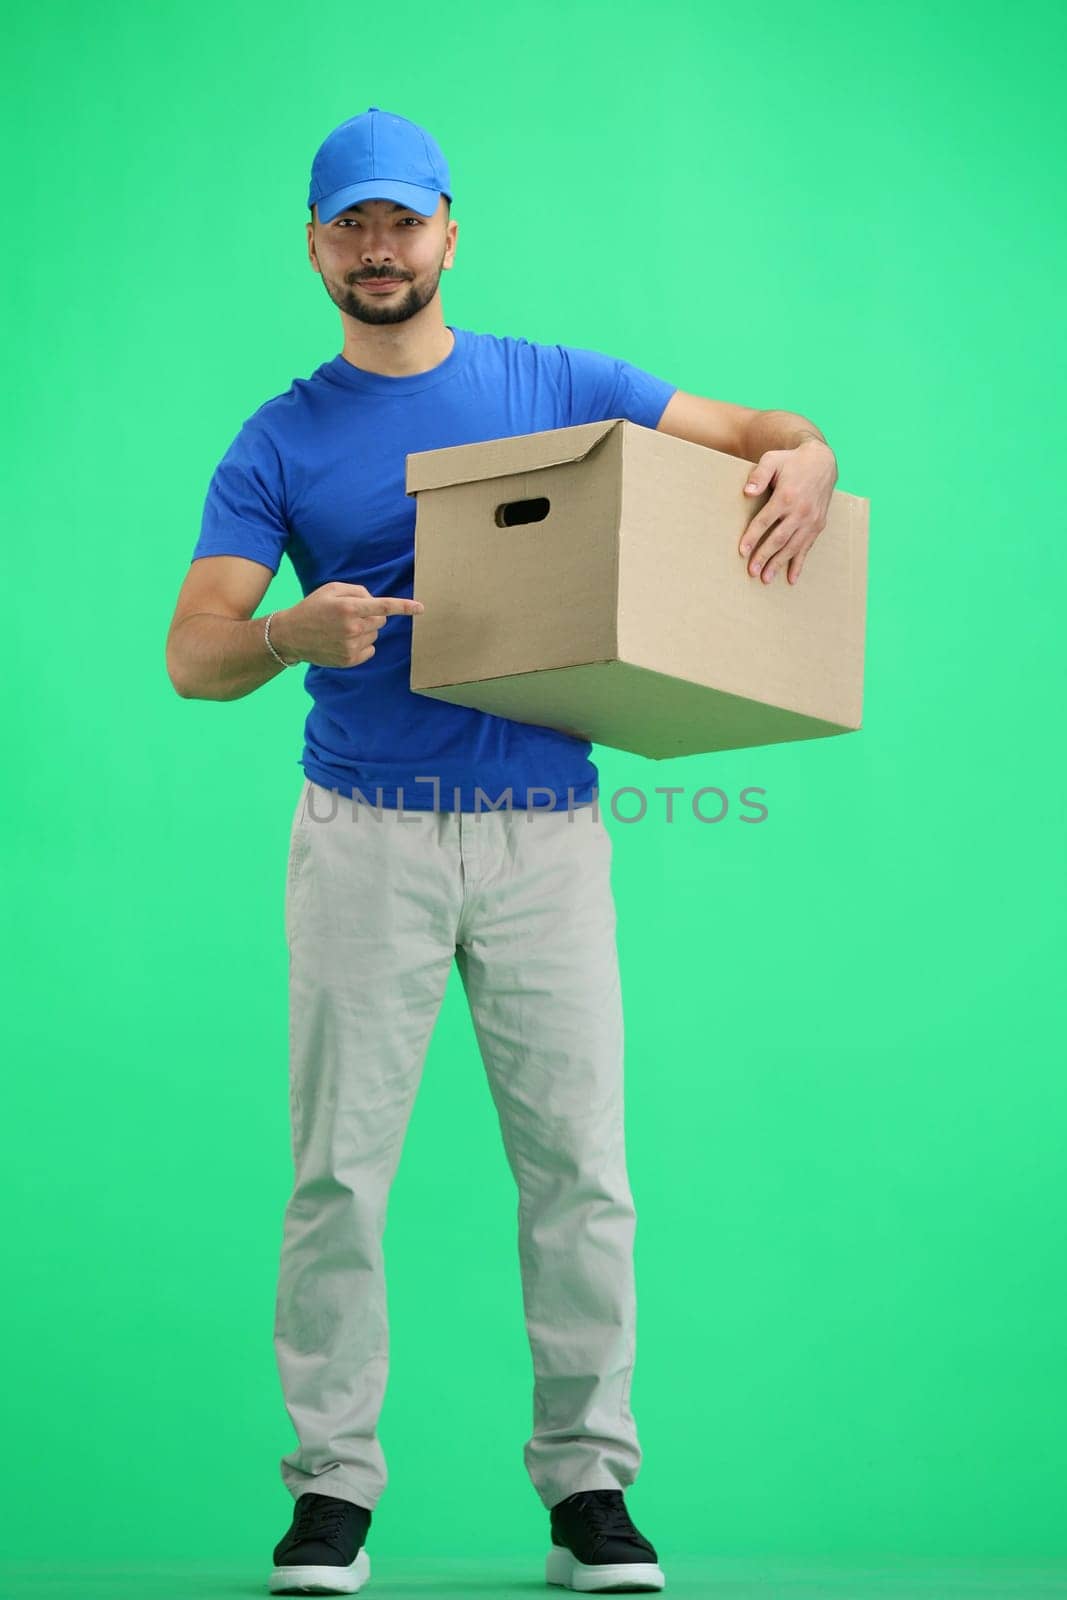 The deliveryman, in full height, on a green background, points to the box by Prosto